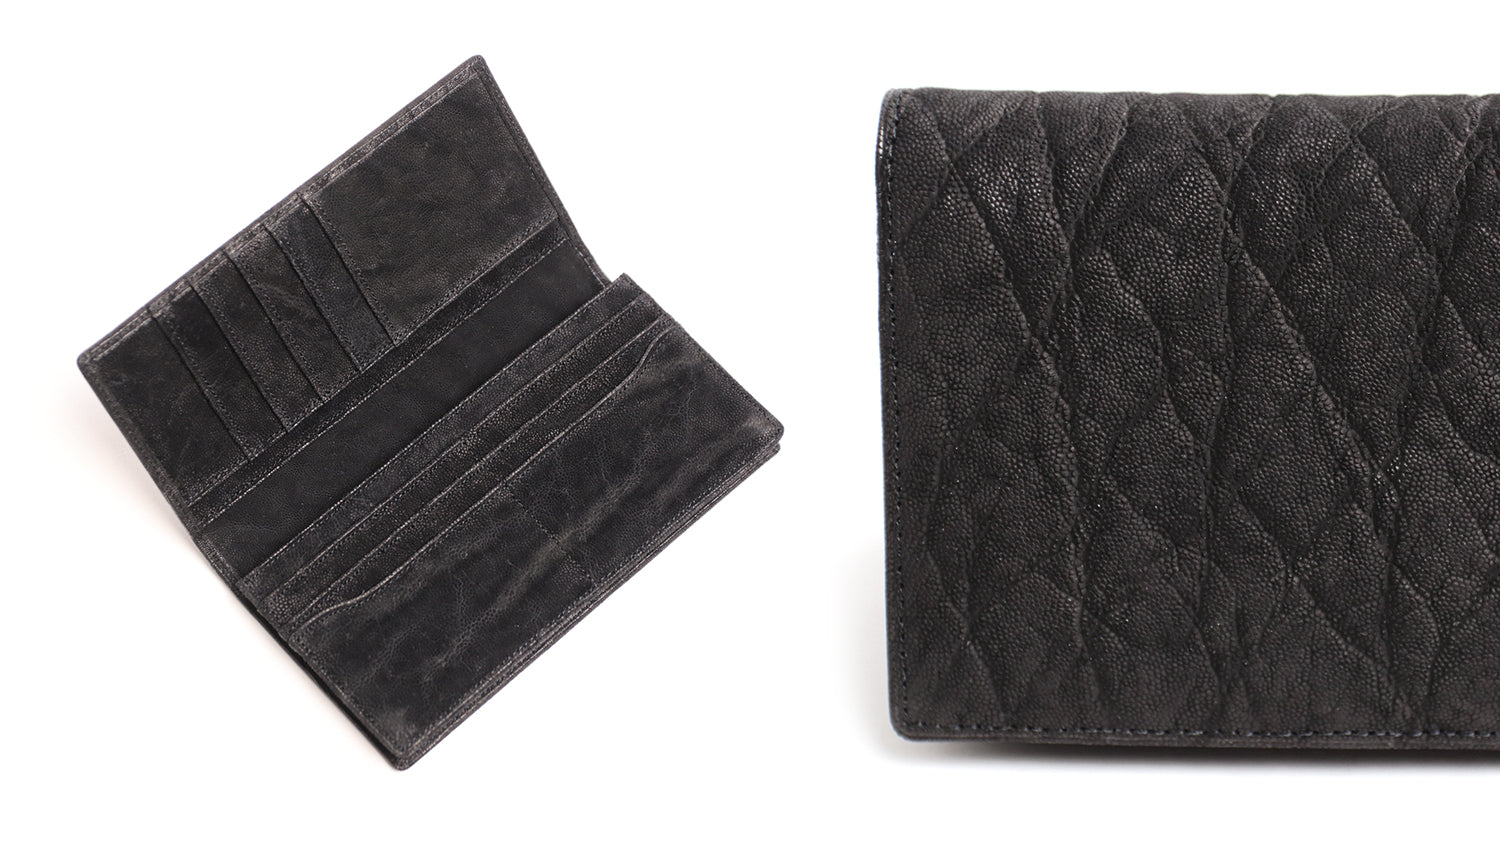 Luggage AOKI 1894 / African Elephant Elephant leather long wallet with a focus on neatness